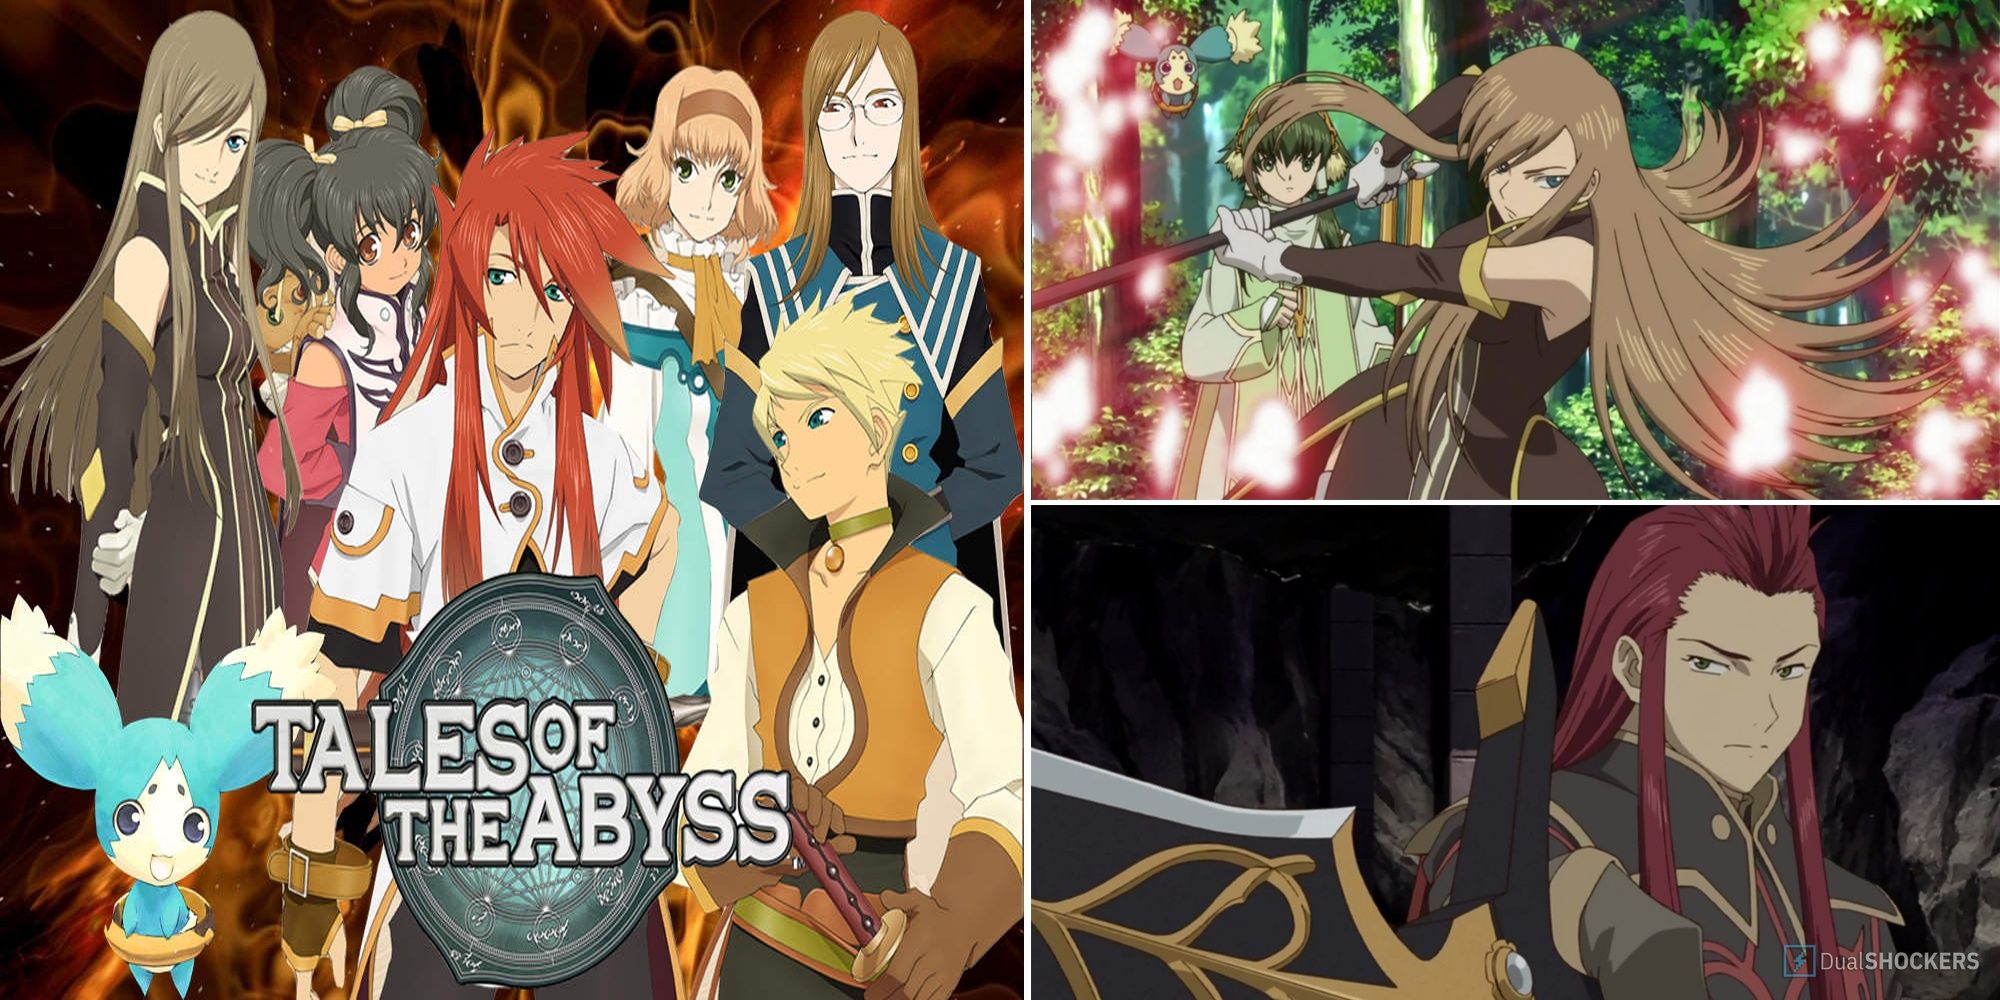 The Entire Cast Of Playable Chracters From The Popular Game, Tales Of The Abyss